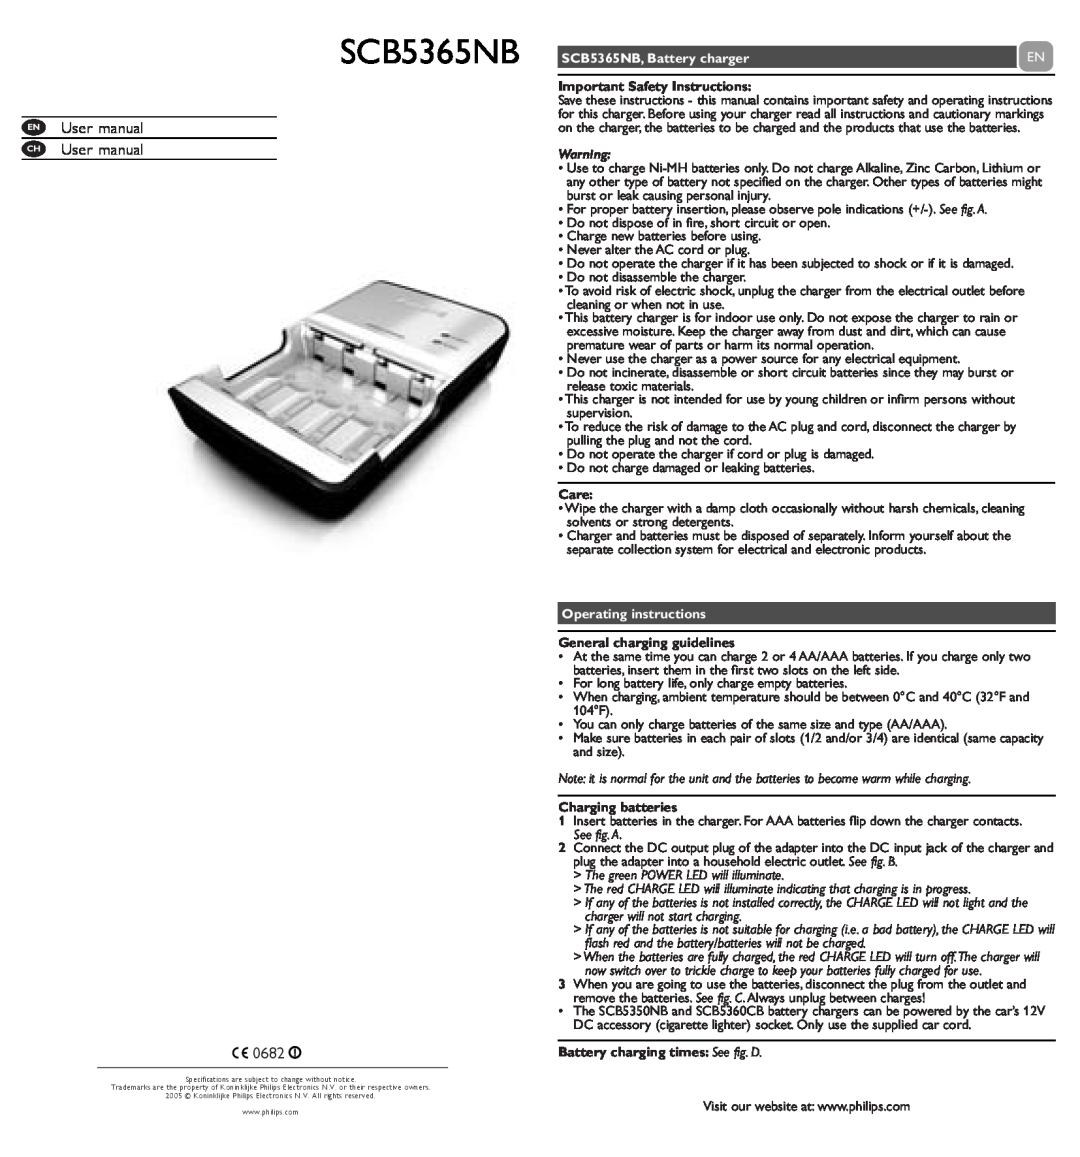 Philips user manual CH User manual 0682, SCB5365NB, Battery charger, Important Safety Instructions, Care 